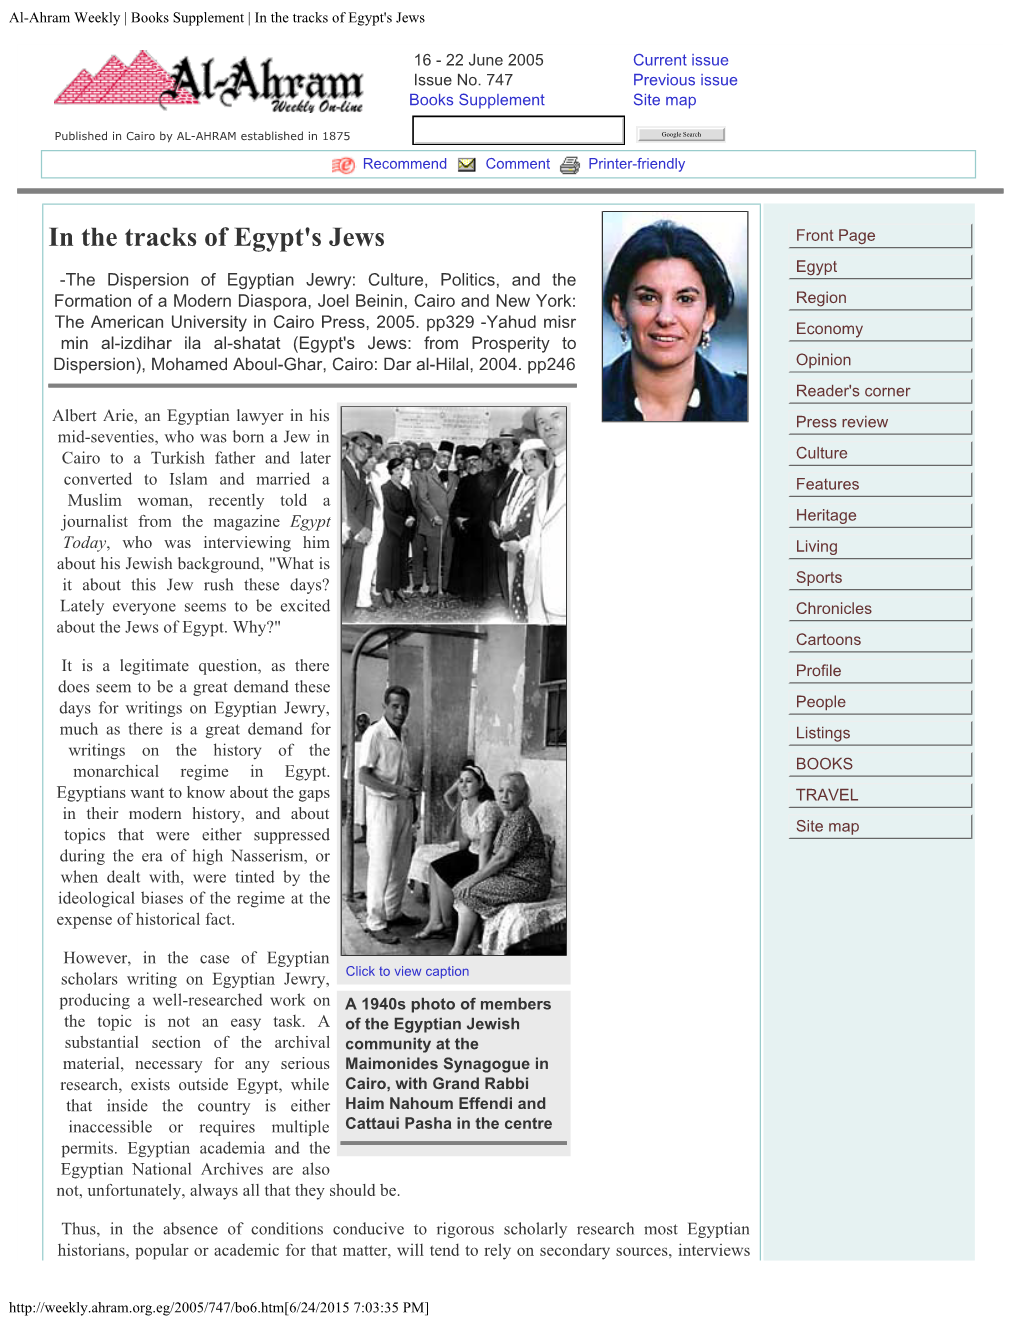 Al-Ahram Weekly | Books Supplement | in the Tracks of Egypt's Jews